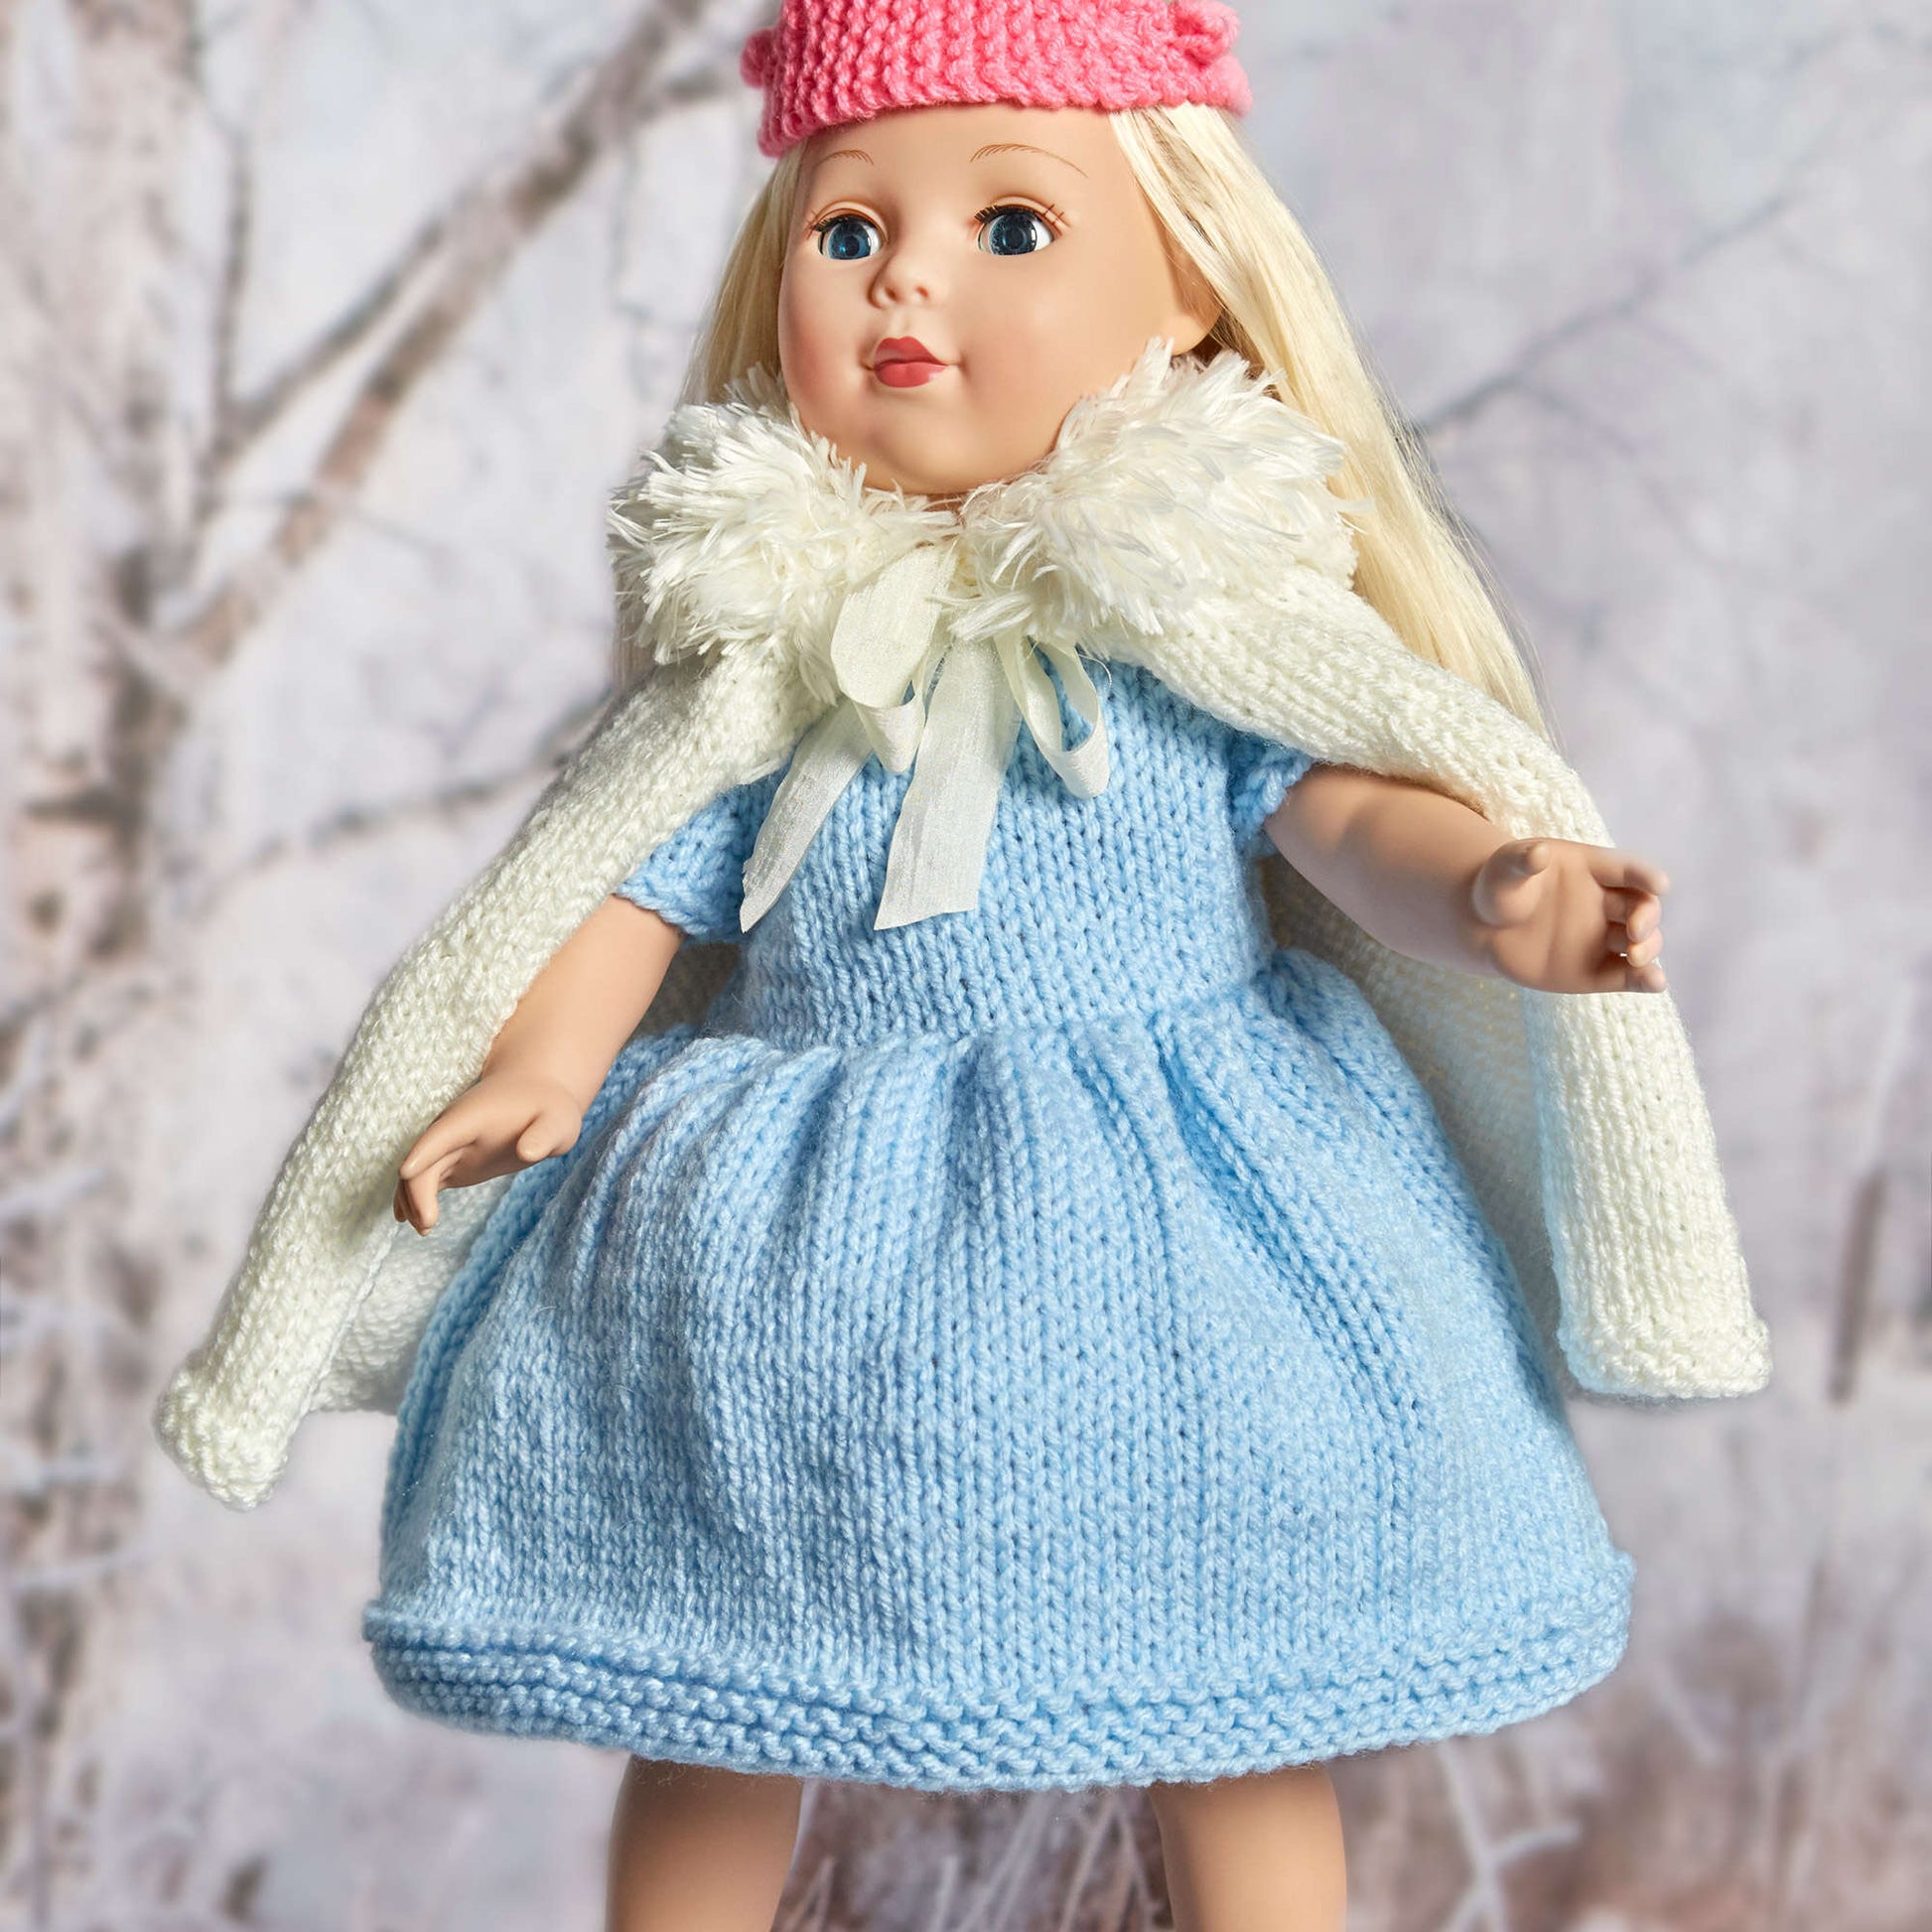 Free Red Heart Royal Princess Doll Outfit Knit Pattern